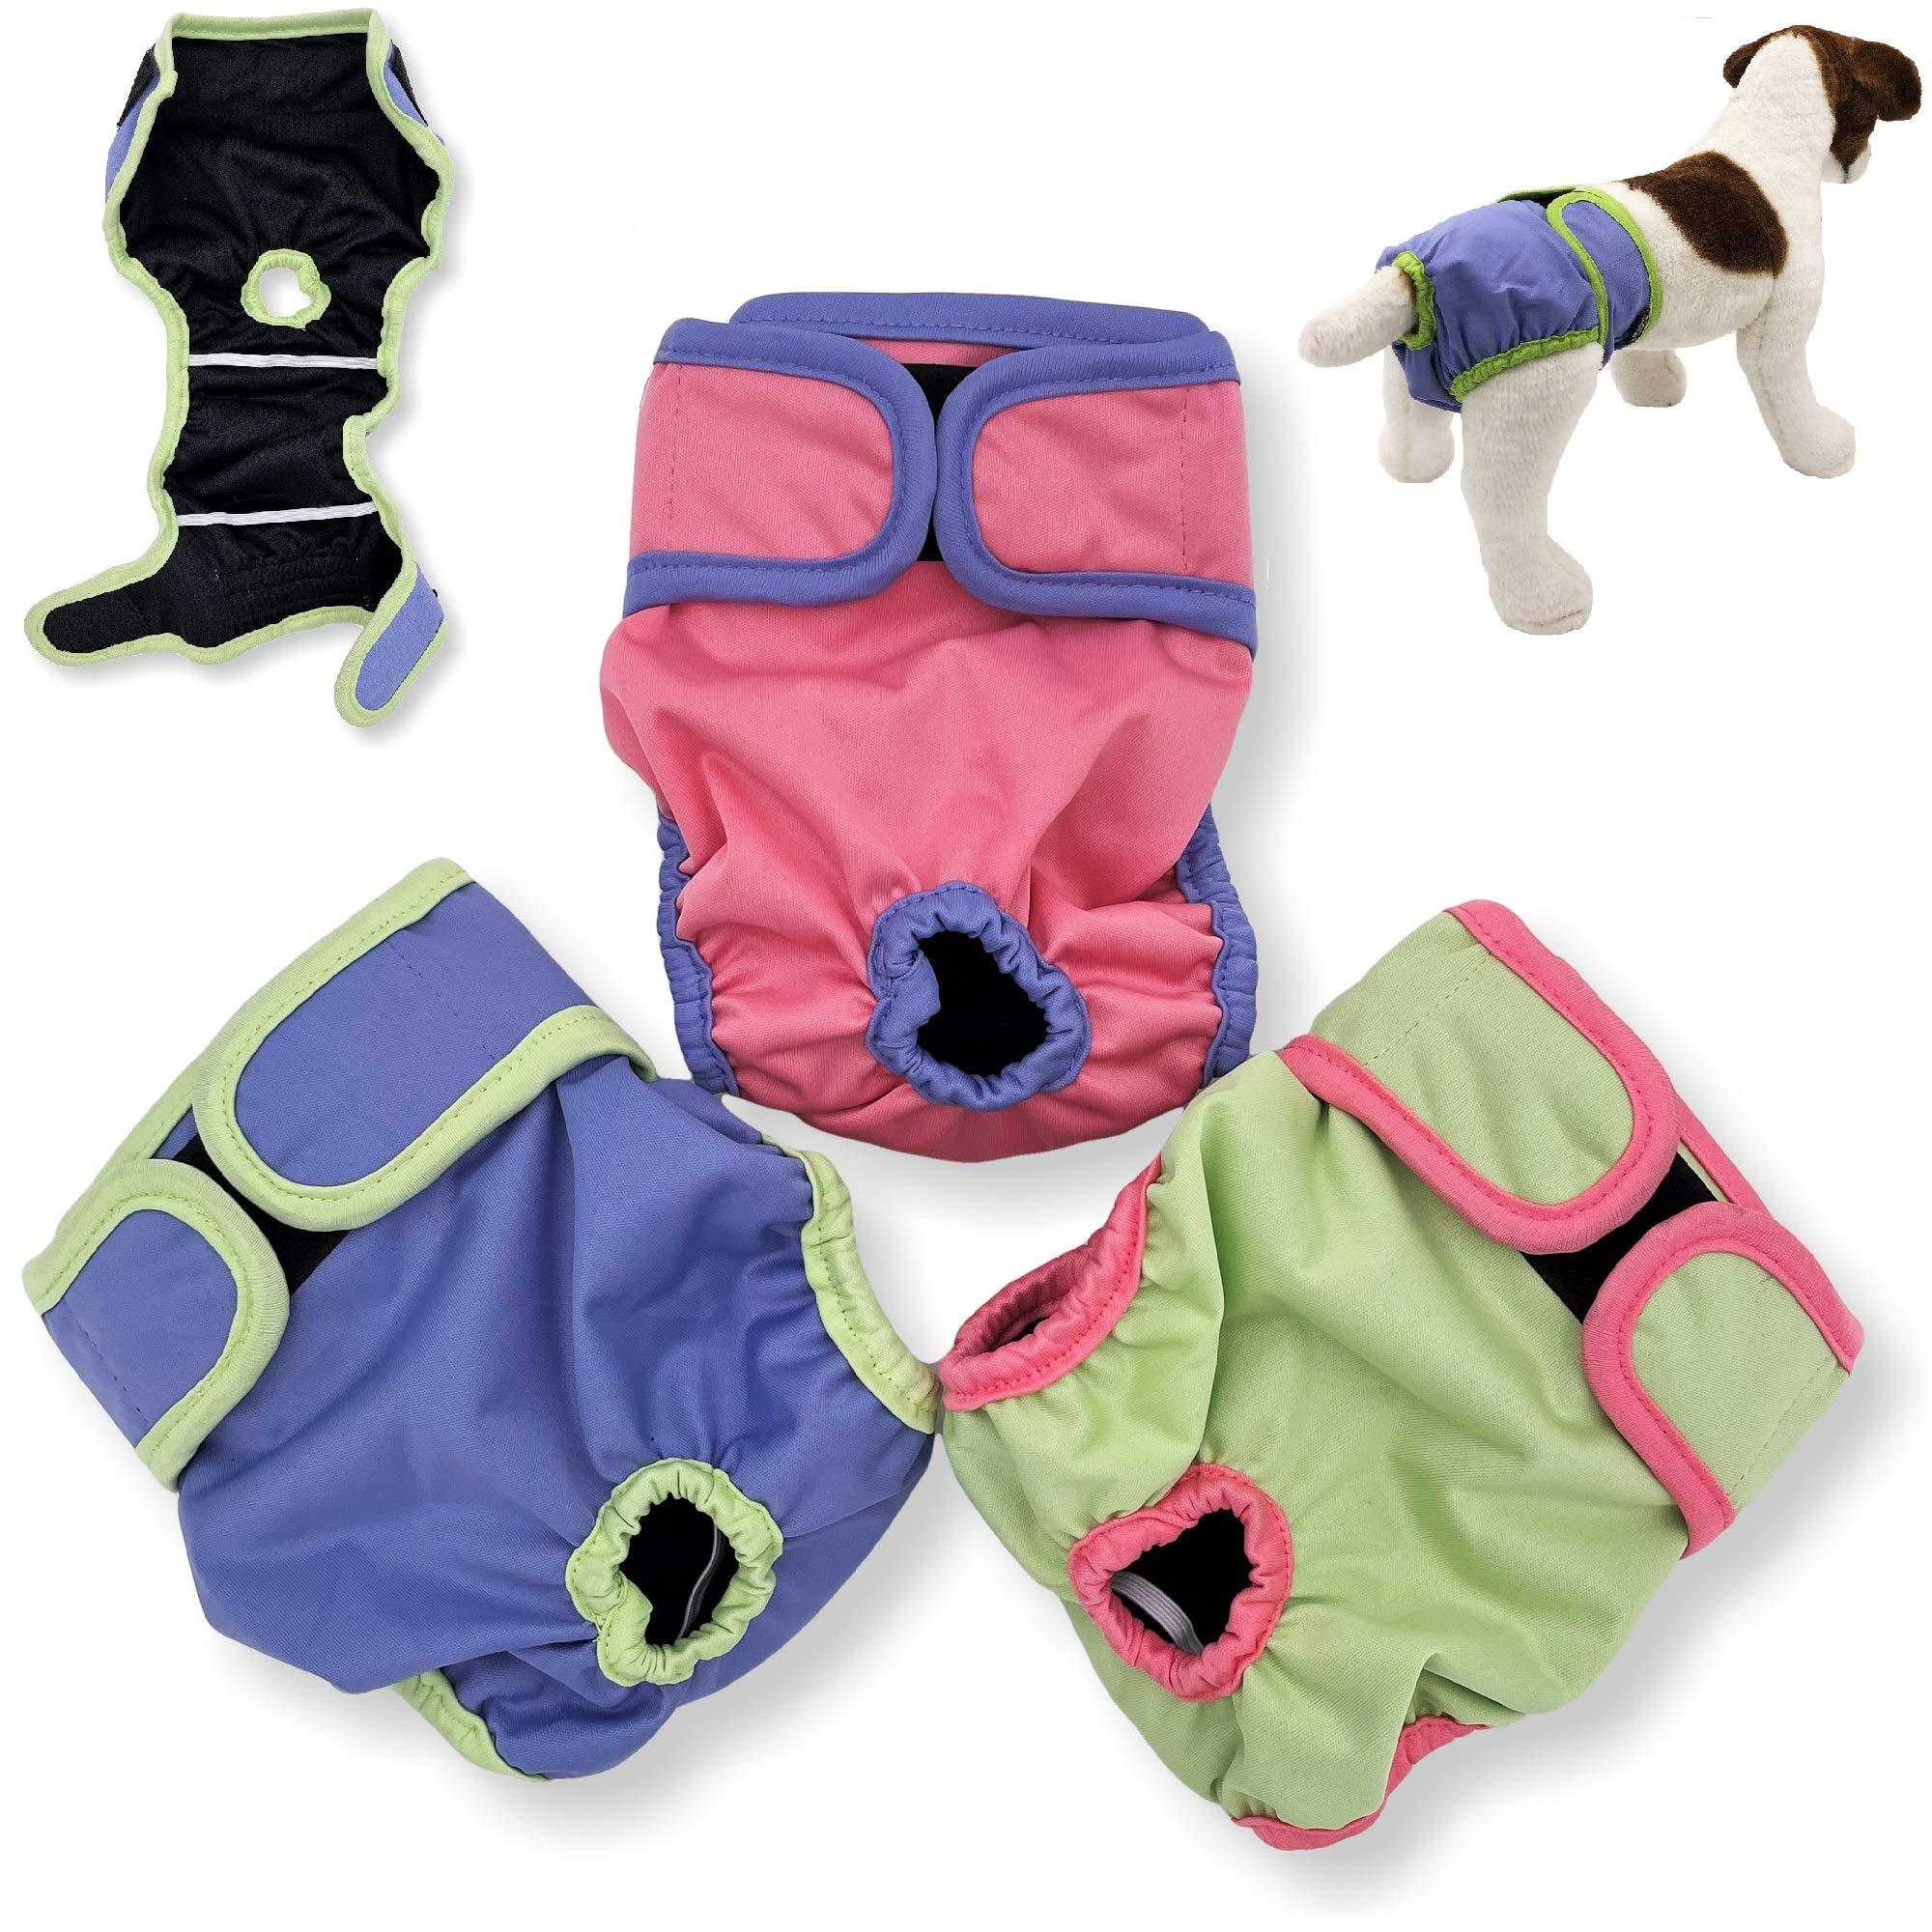 FunnyDogClothes pack of 3 female dog diapers cat waterproof leak proof washable panties reusable for small medium and large pets (s: waist 12